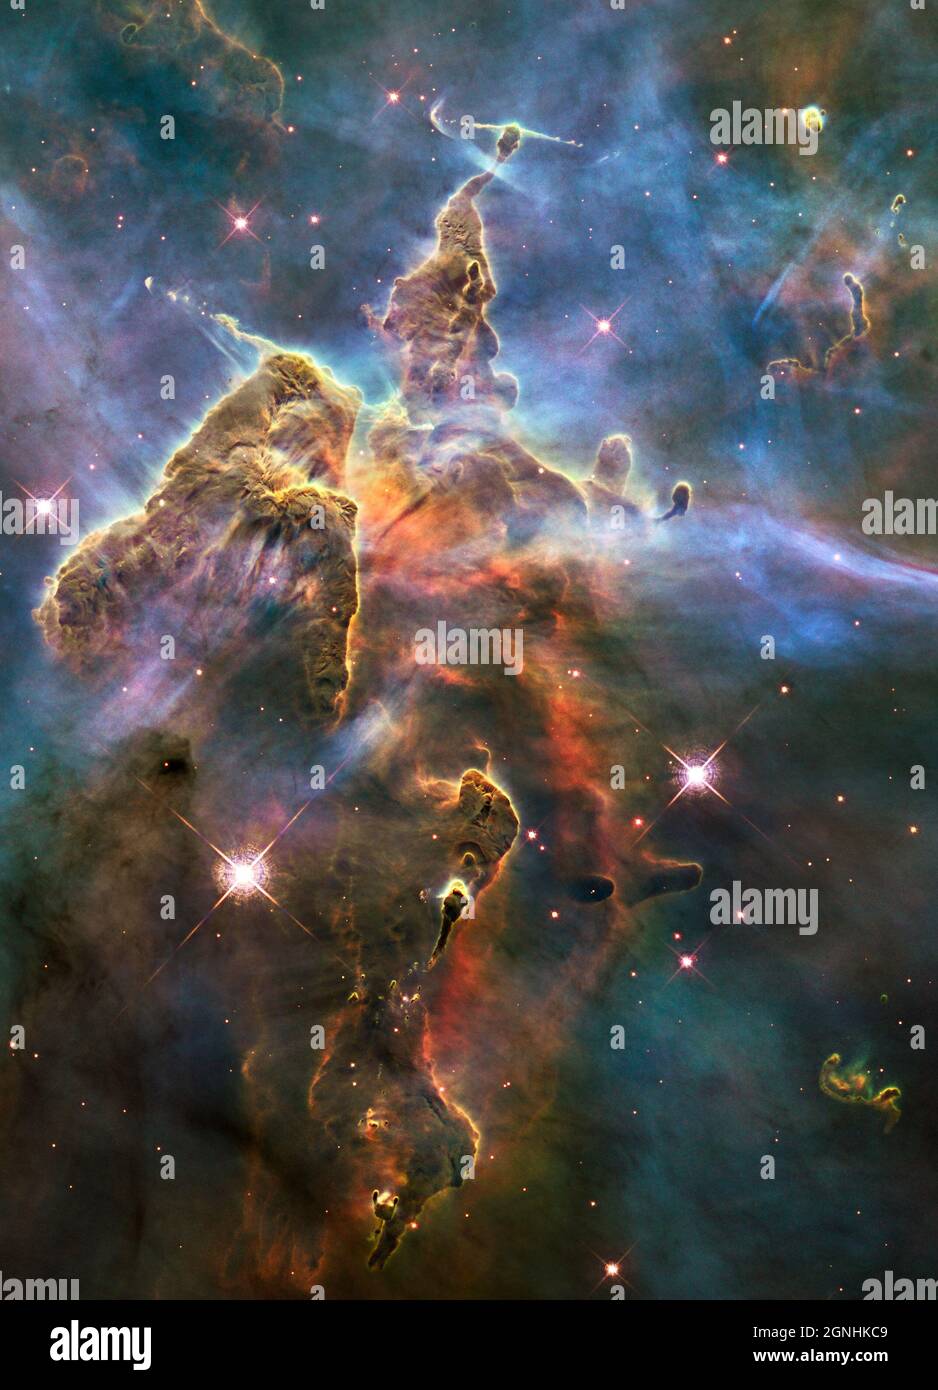 The Mystic Mountain star formation area in the Carina Nebula. It hsows stars forming in the dust and the long dust jets called Herbig-Haro objects. These are HH901 andH902. Image source NASA/ESA Hubble Space Telescope Stock Photo